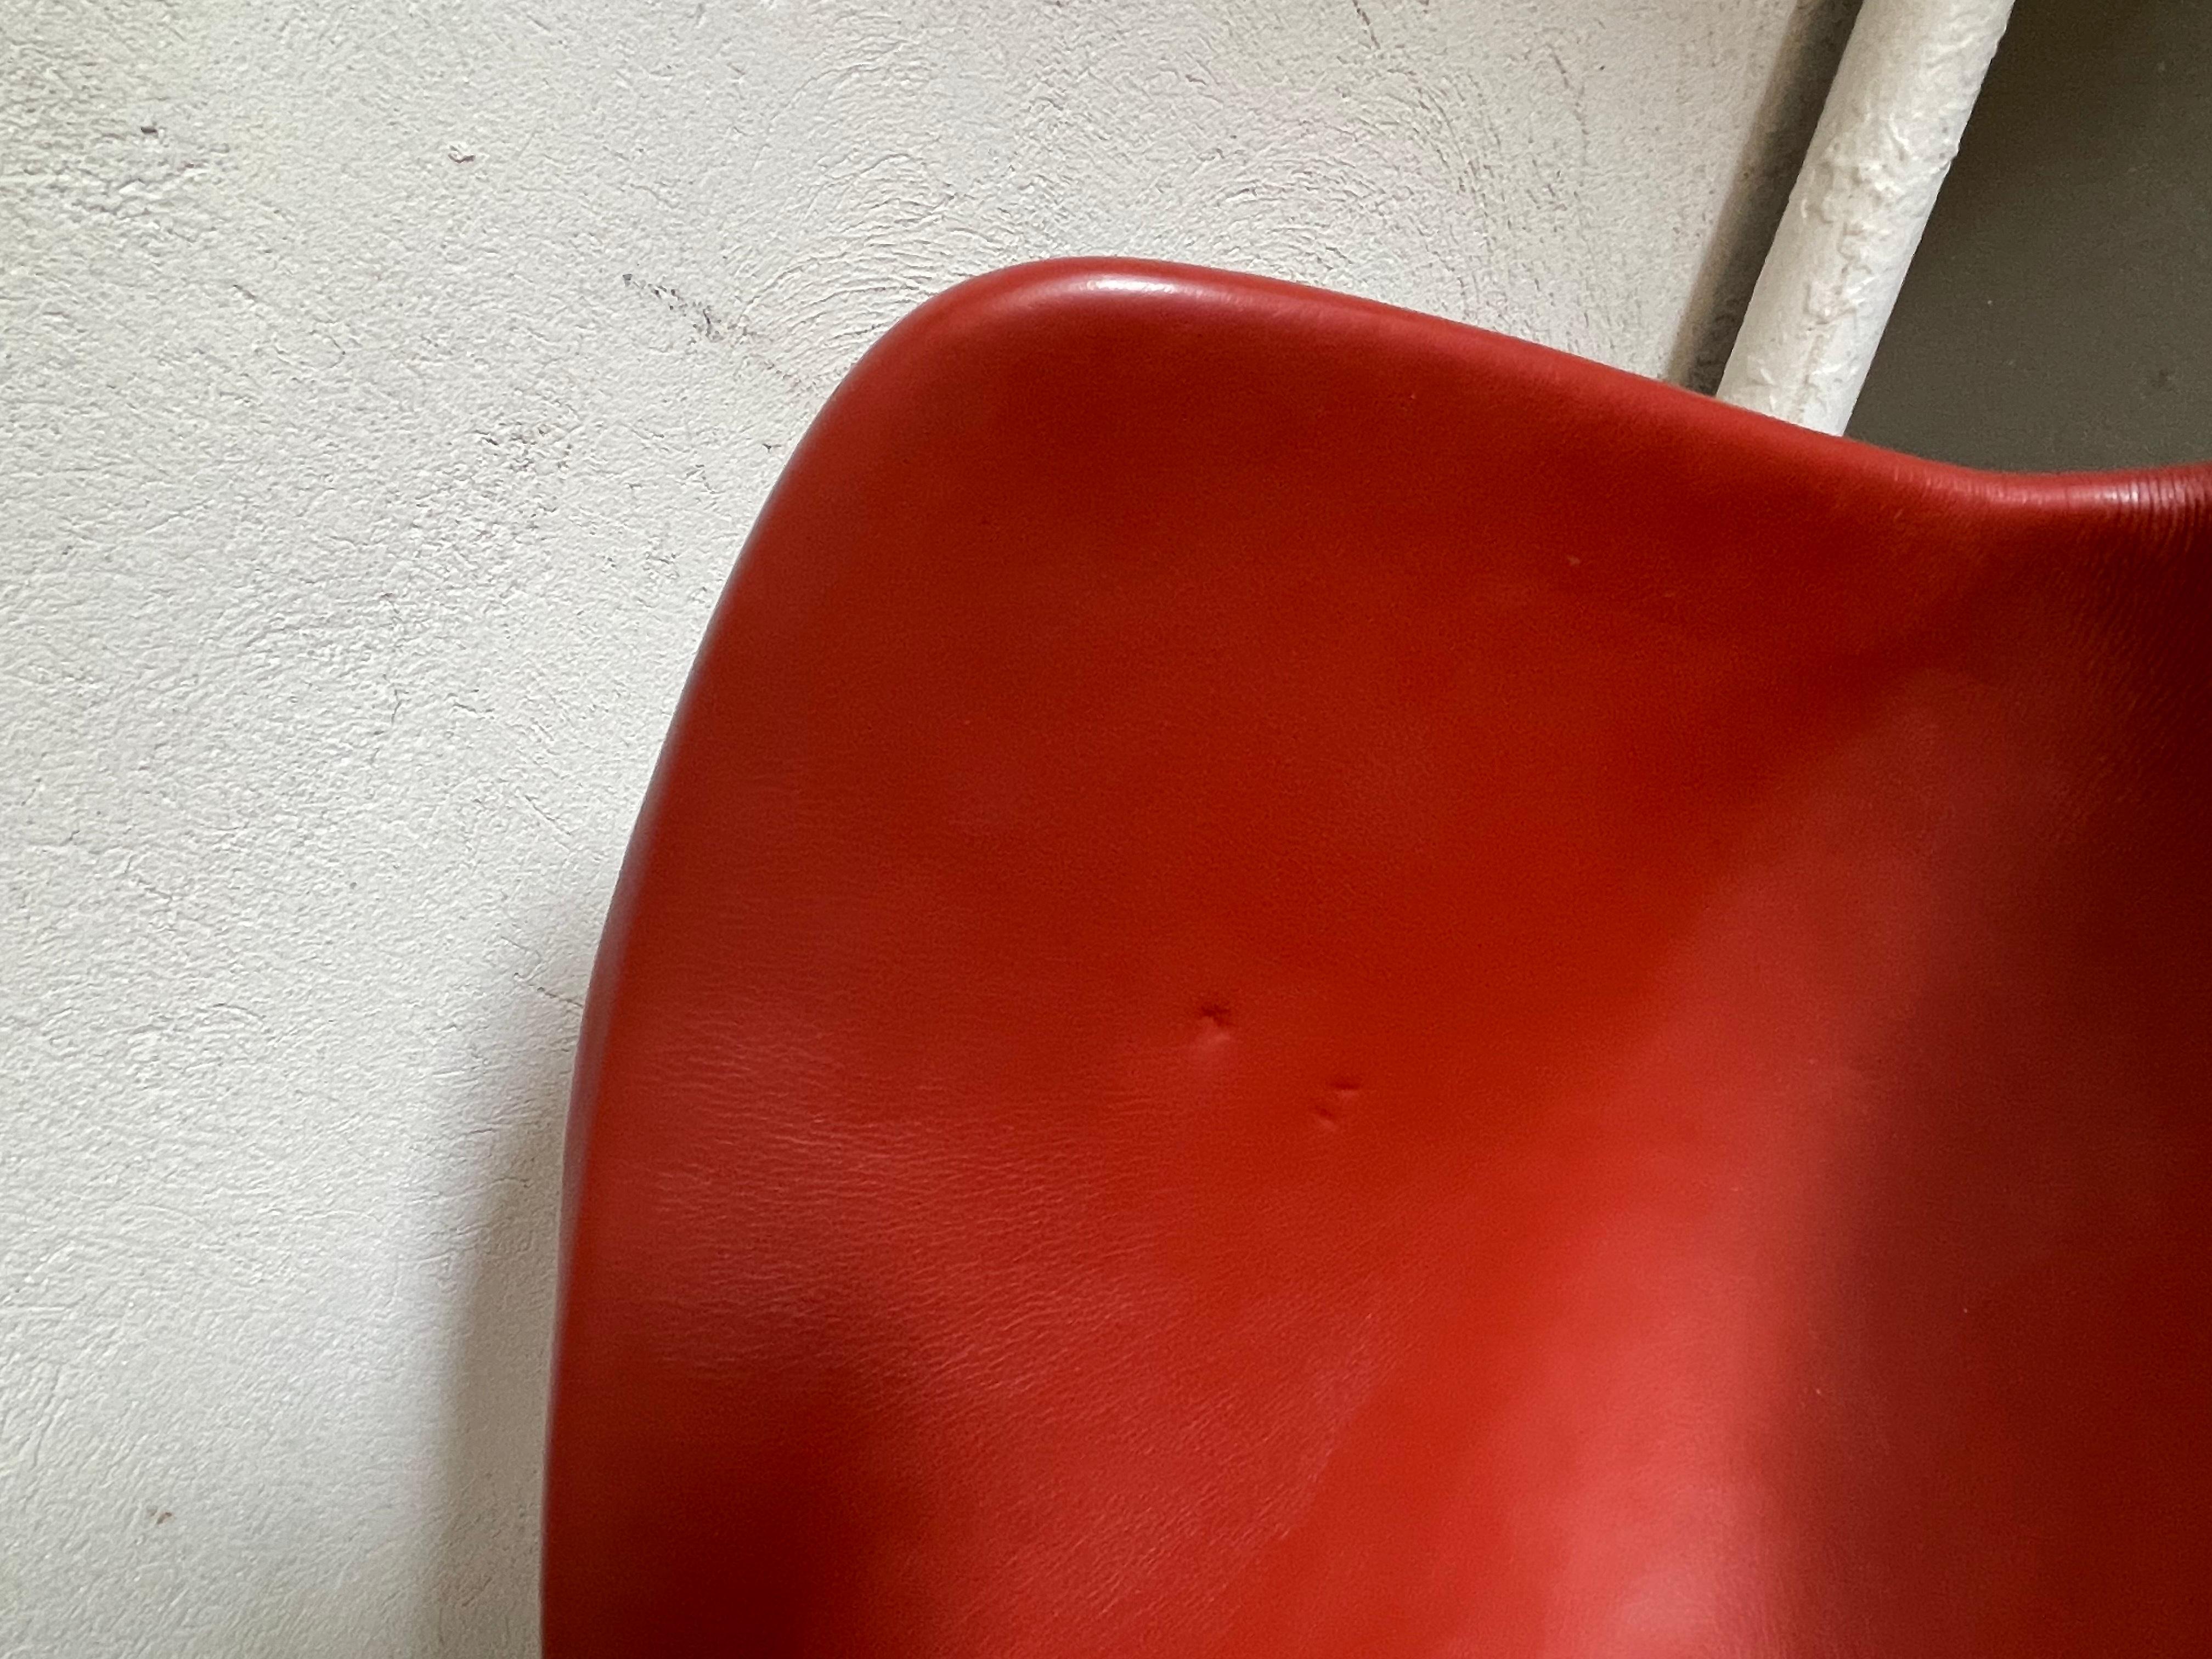 PK 9 - 'Tulip' dining chair in patinated red leather on steel frame. Poul Kjærholm / Fritz Hansen.